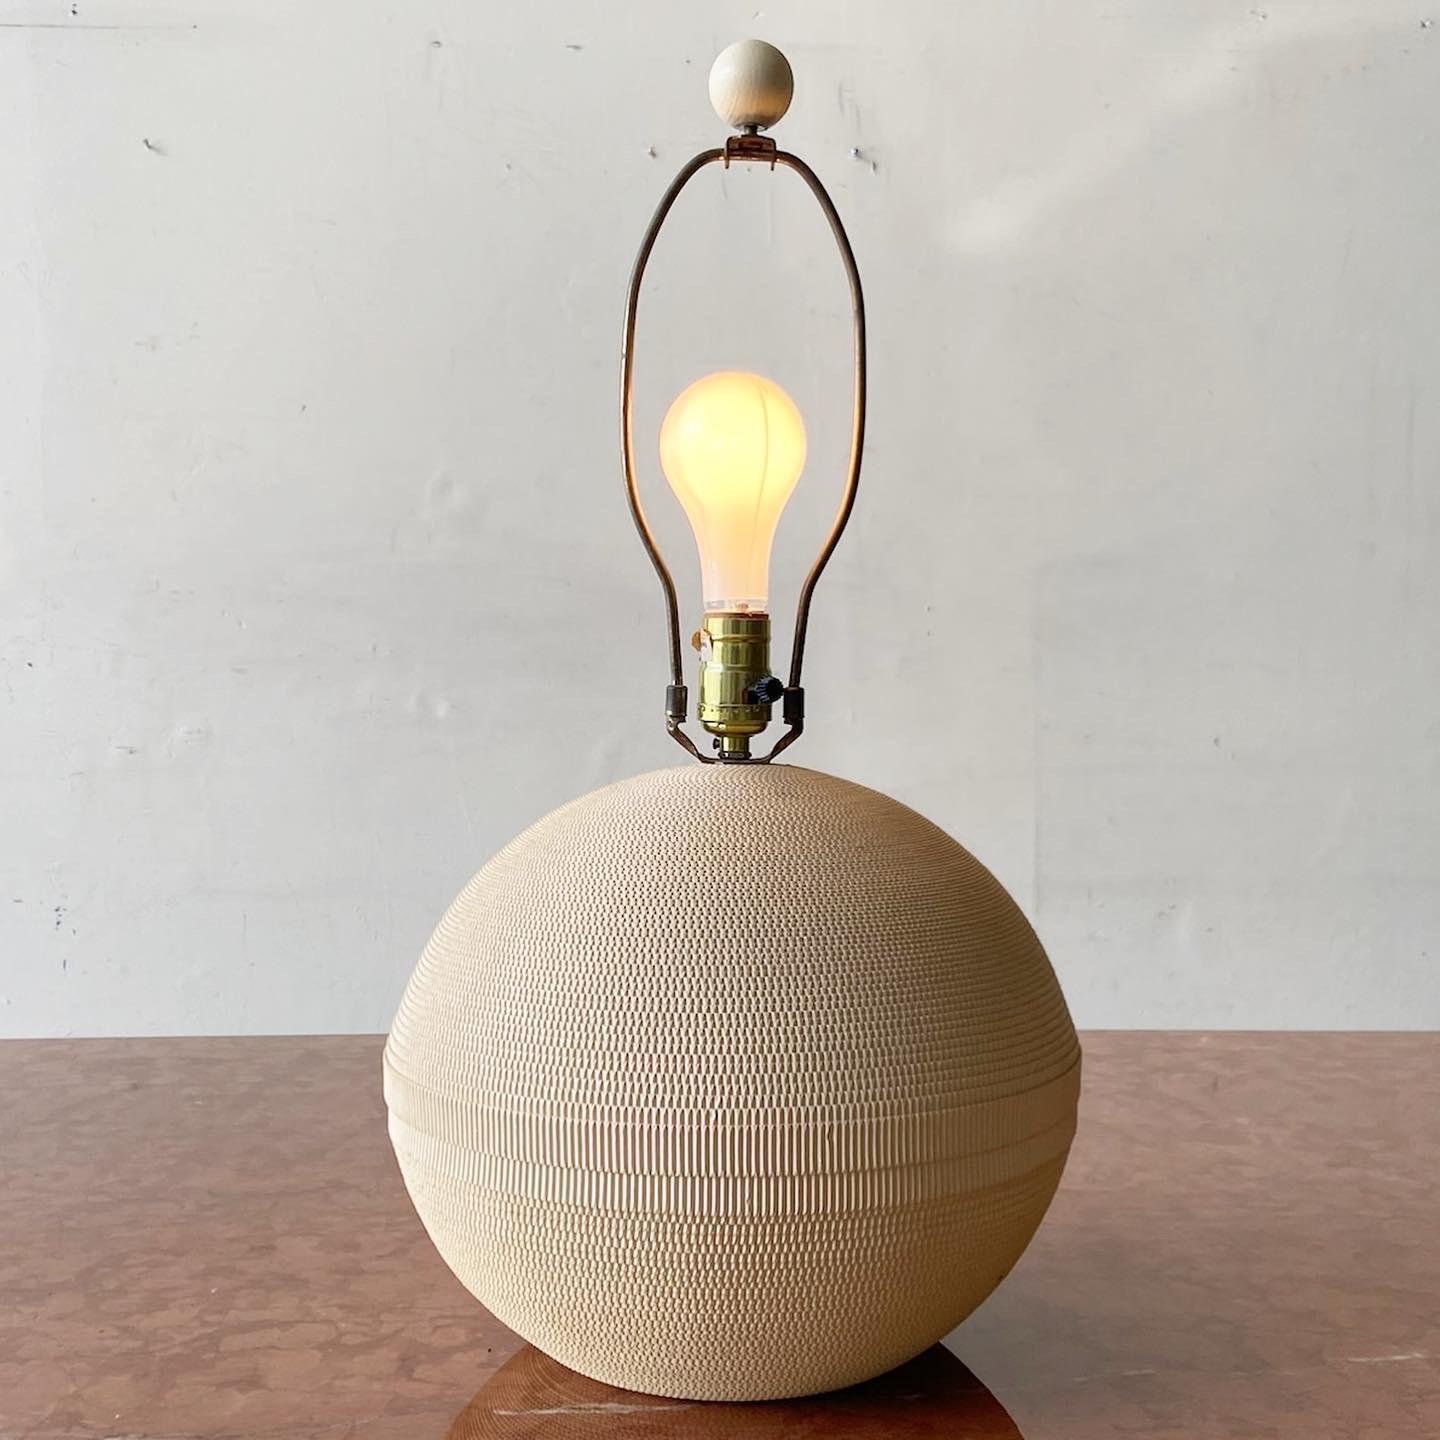 Incredible mid Century Modern table lamp. Body is made of a corrugated cardboard.

3 way lighting